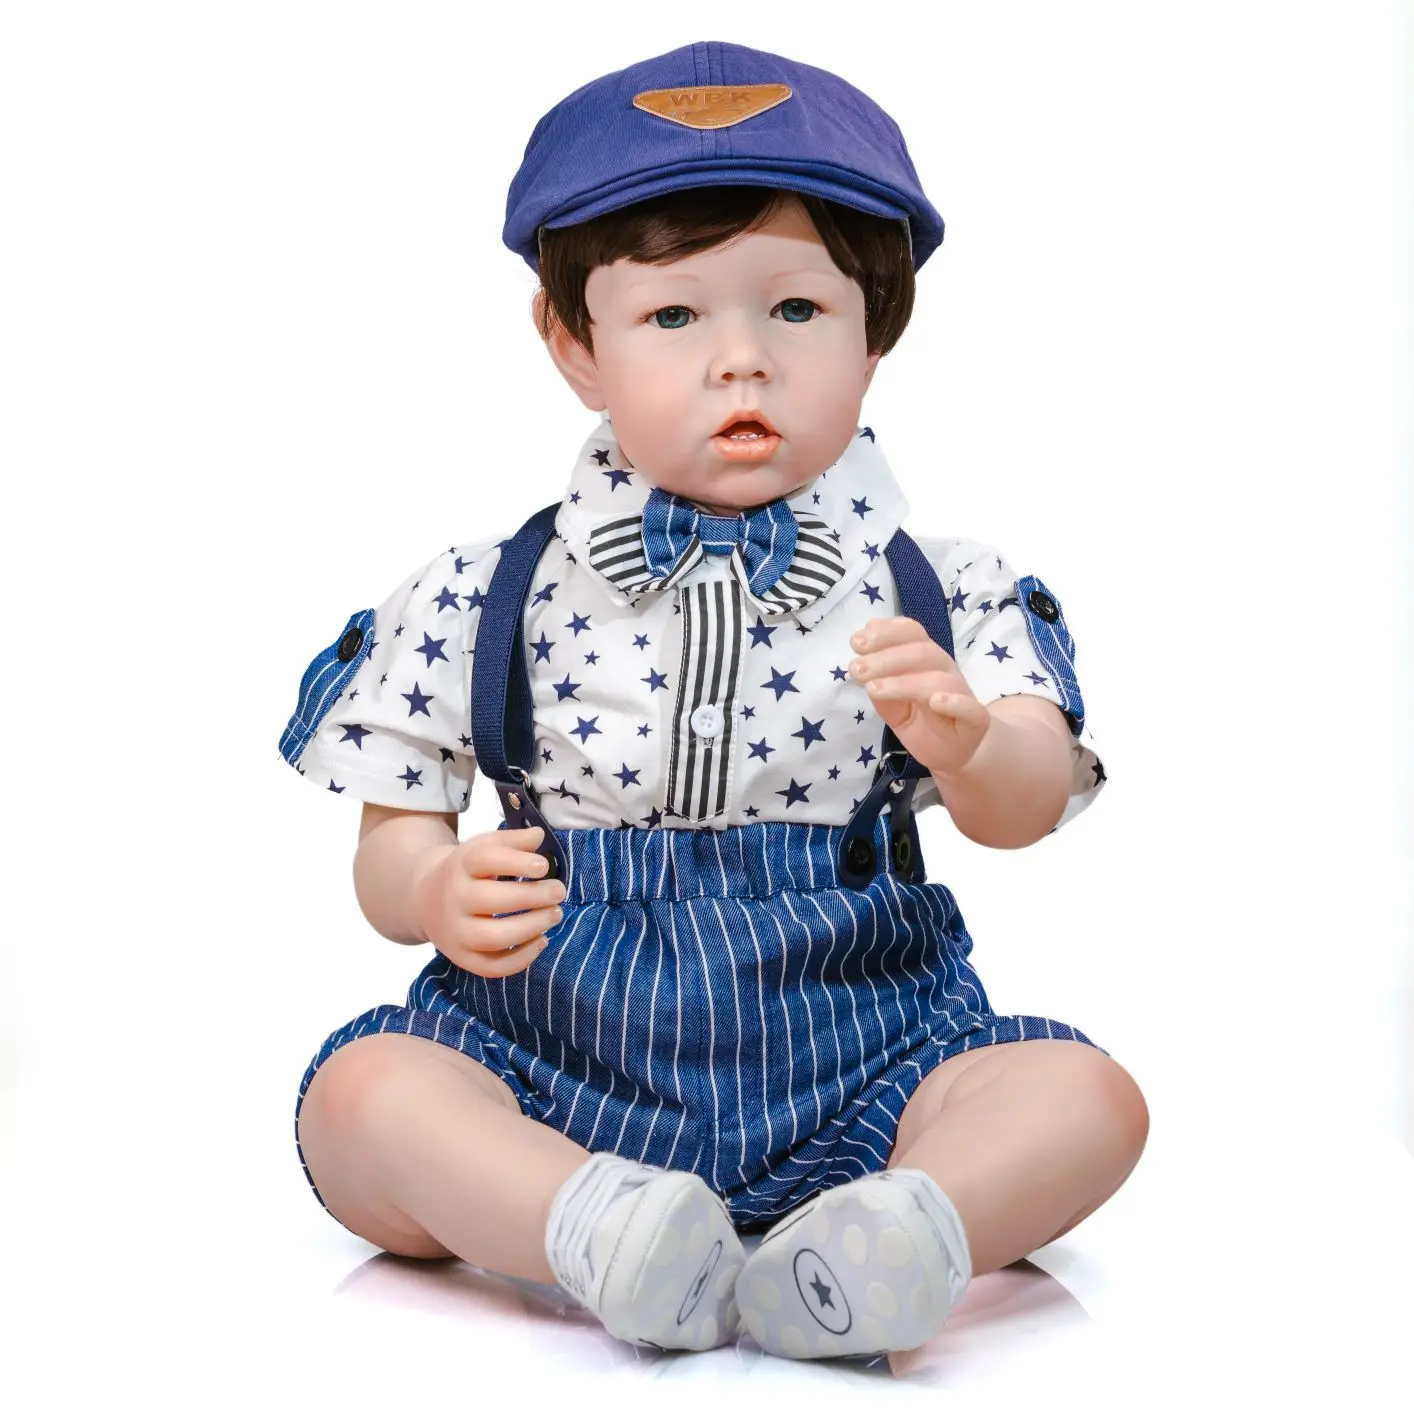 

Huge reborn toddler doll 70CM Liam bebe reborn like 6-9M size real baby doll alive clothing model children play house toys gift